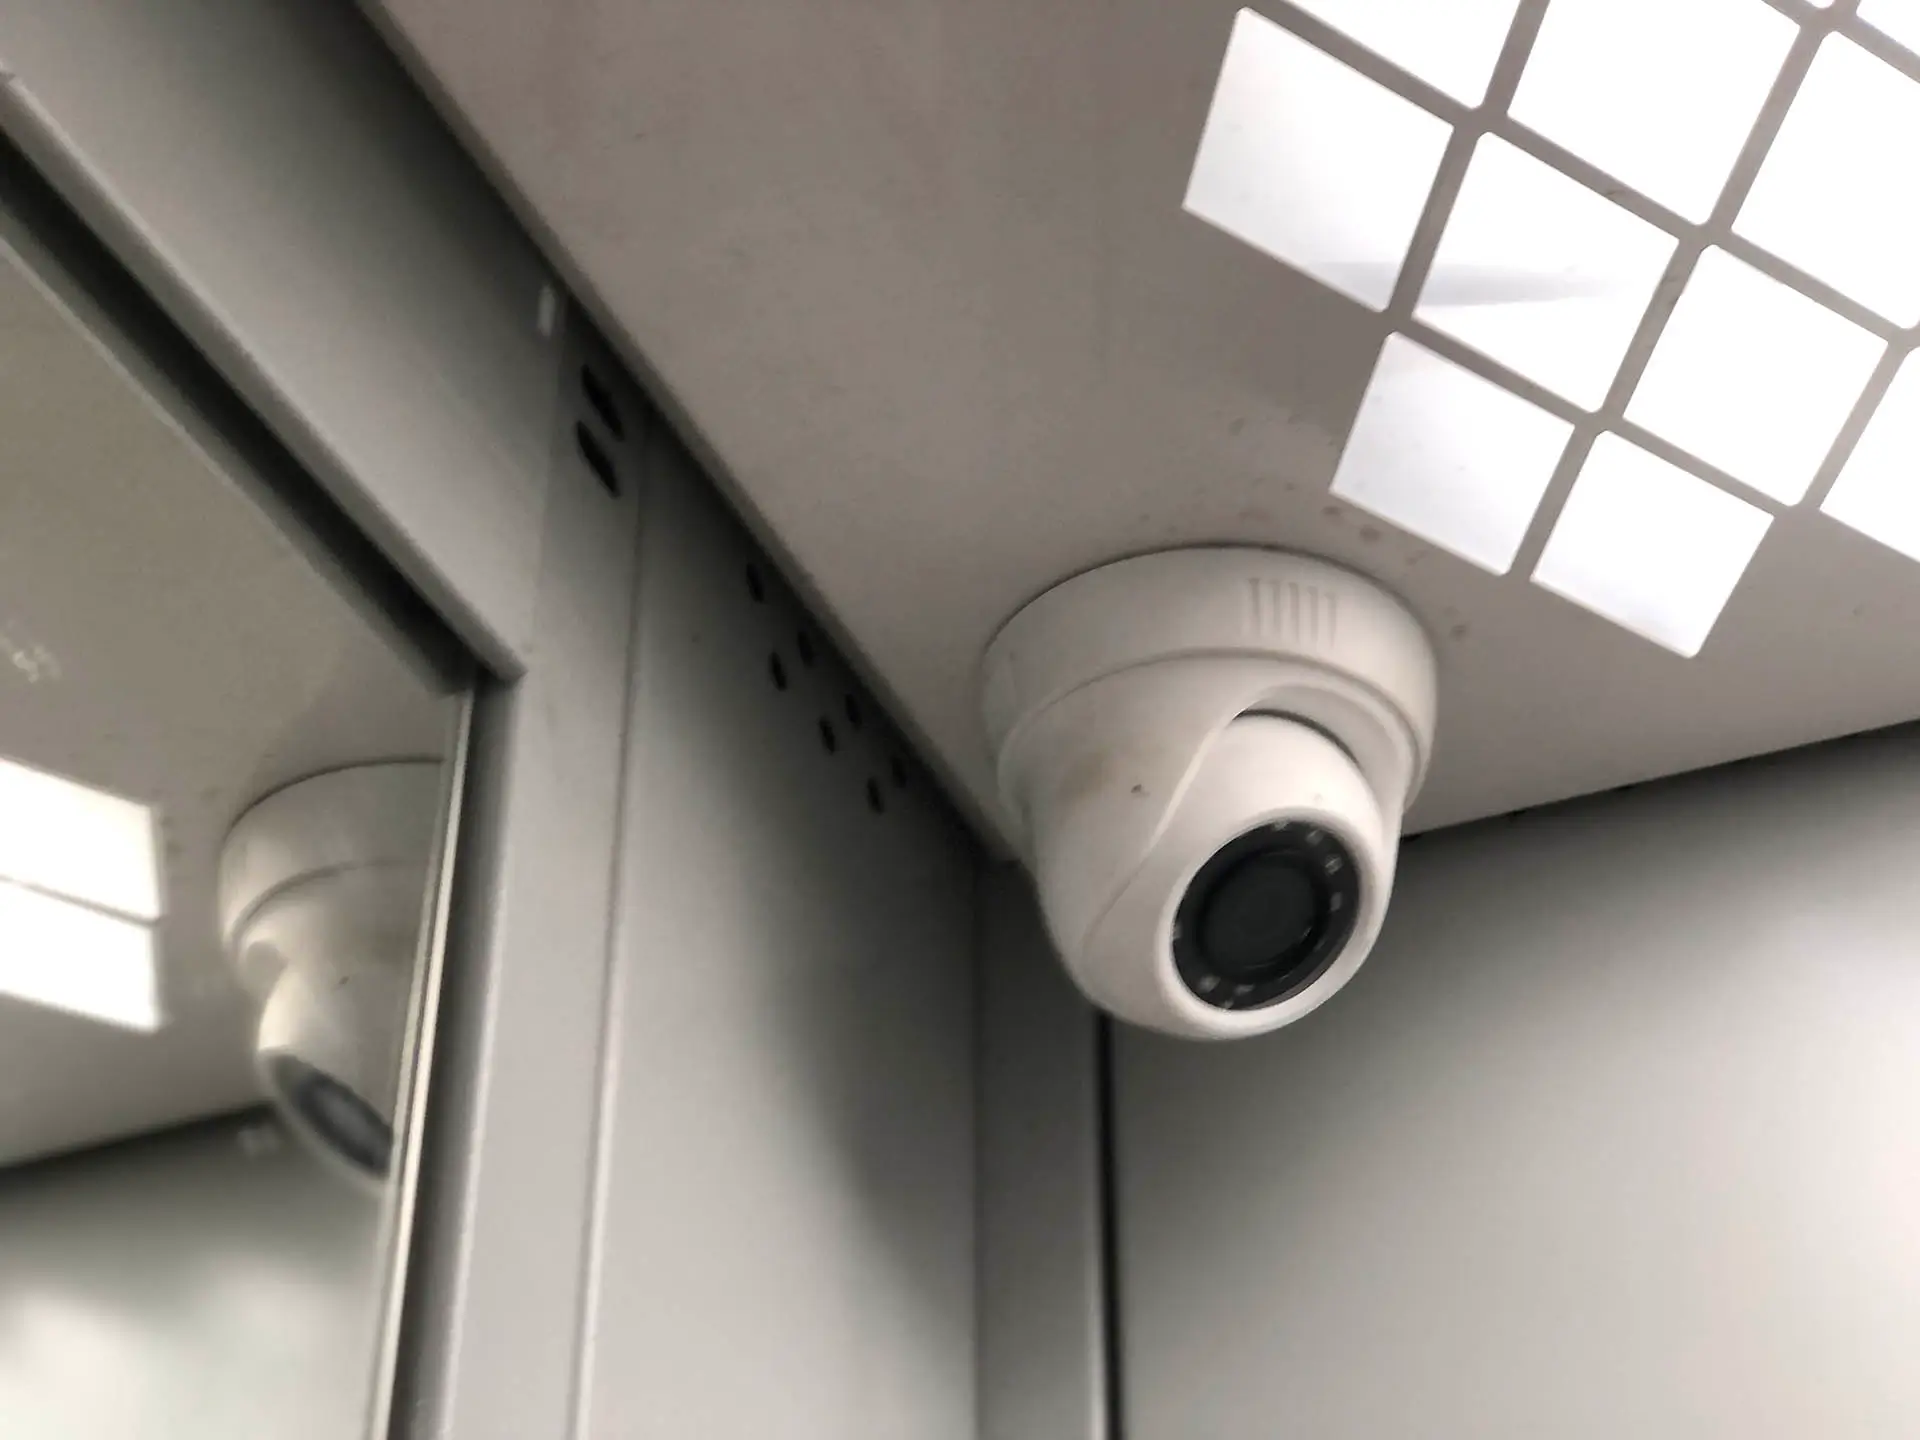 security-cctv-camera-on-the-ceiling-of-the-elevator